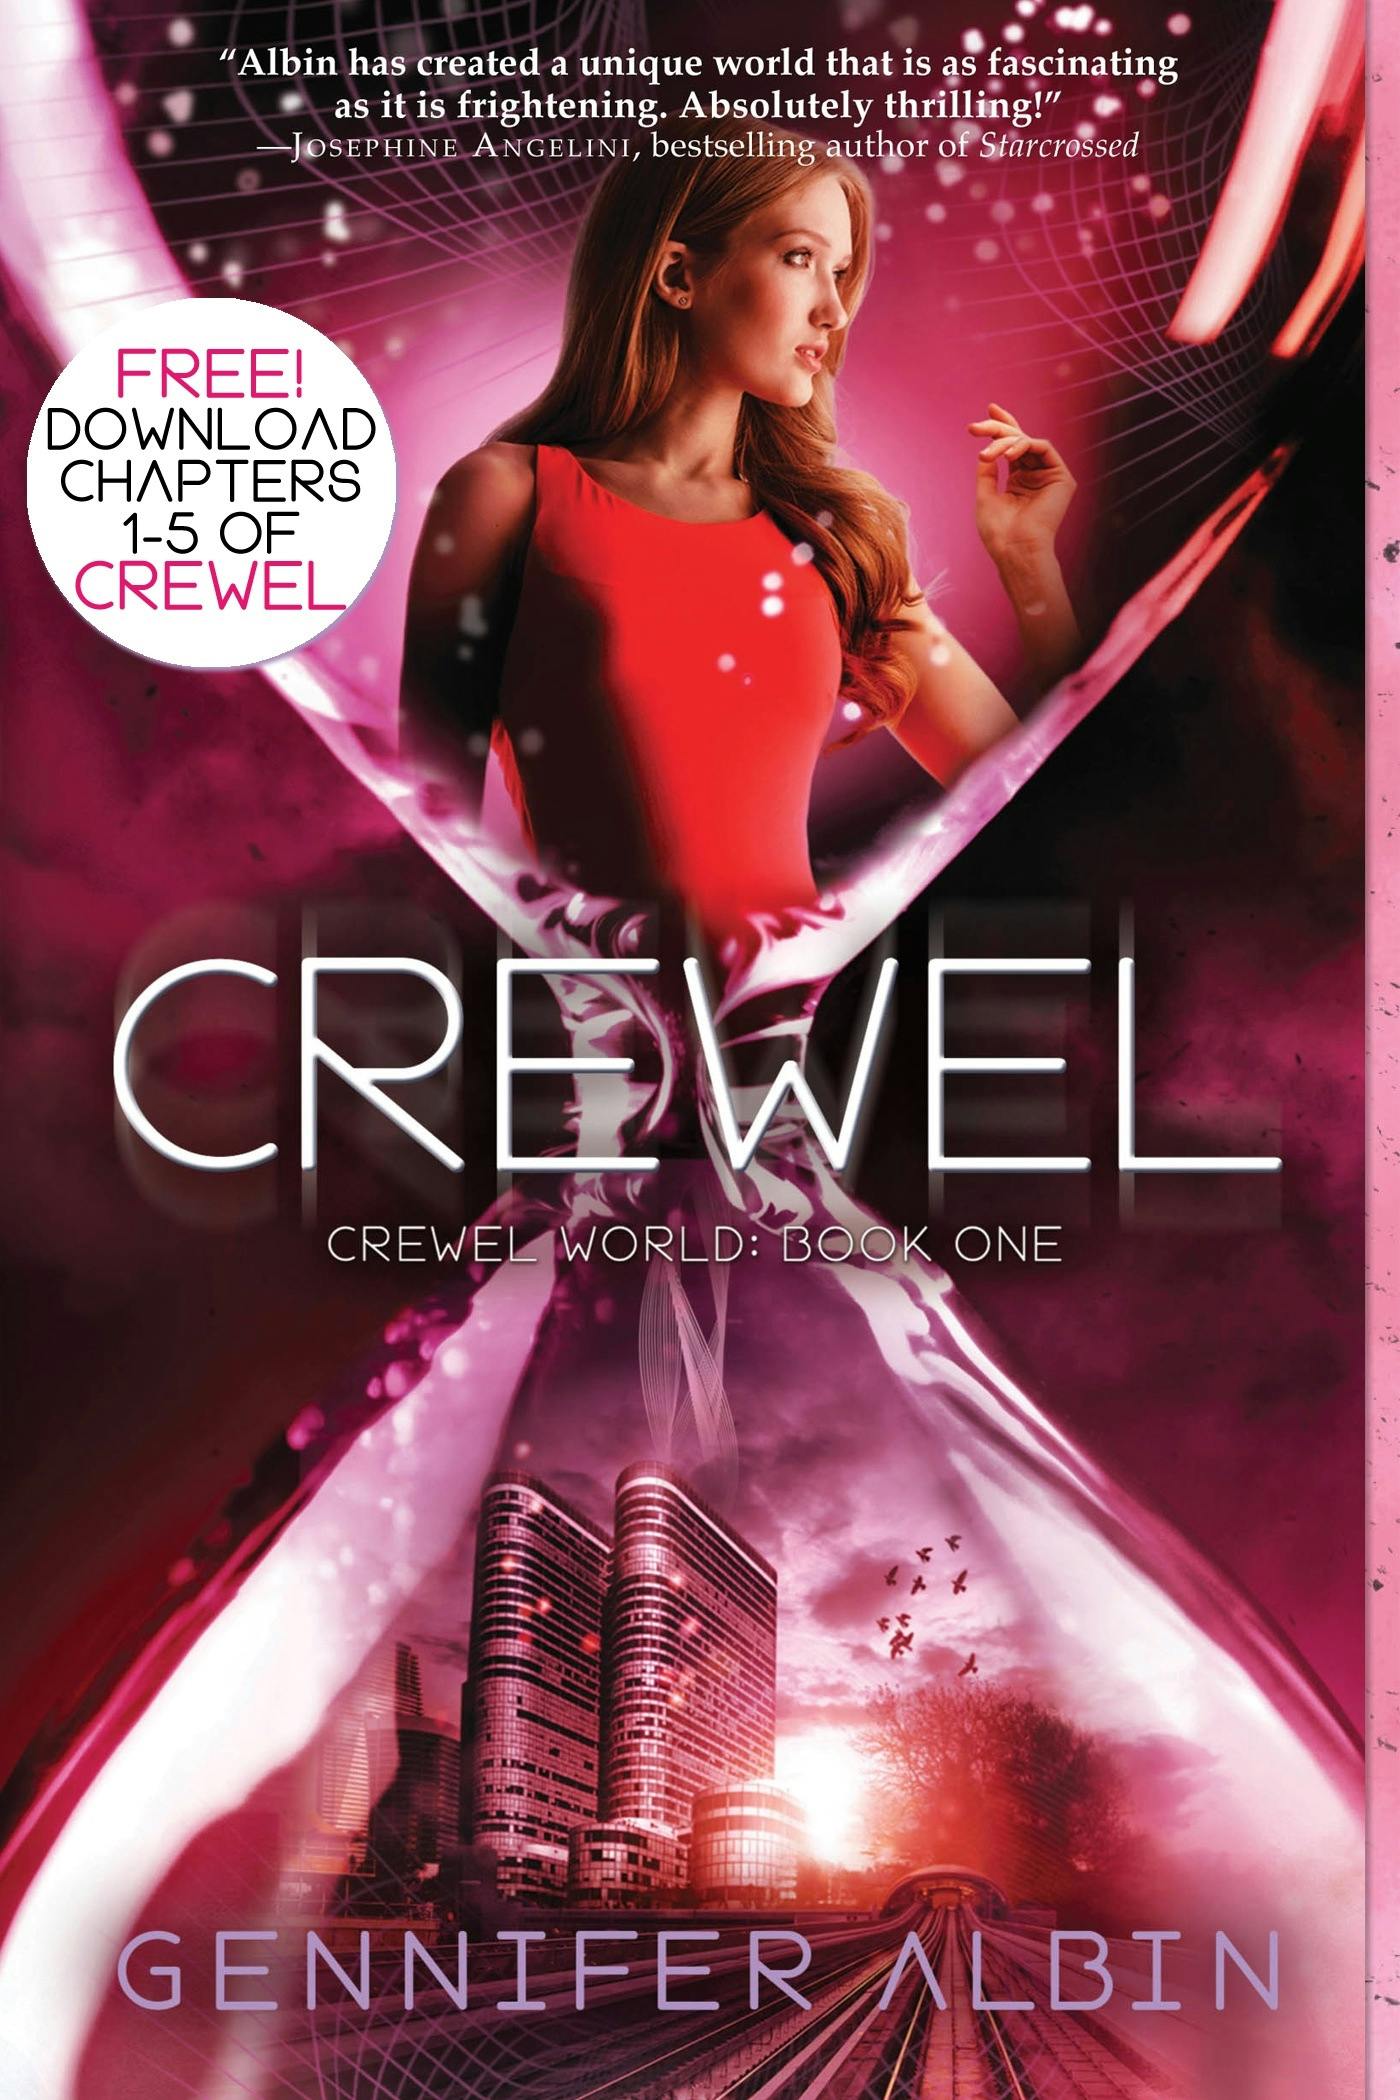 Image of Crewel: Chapters 1-5